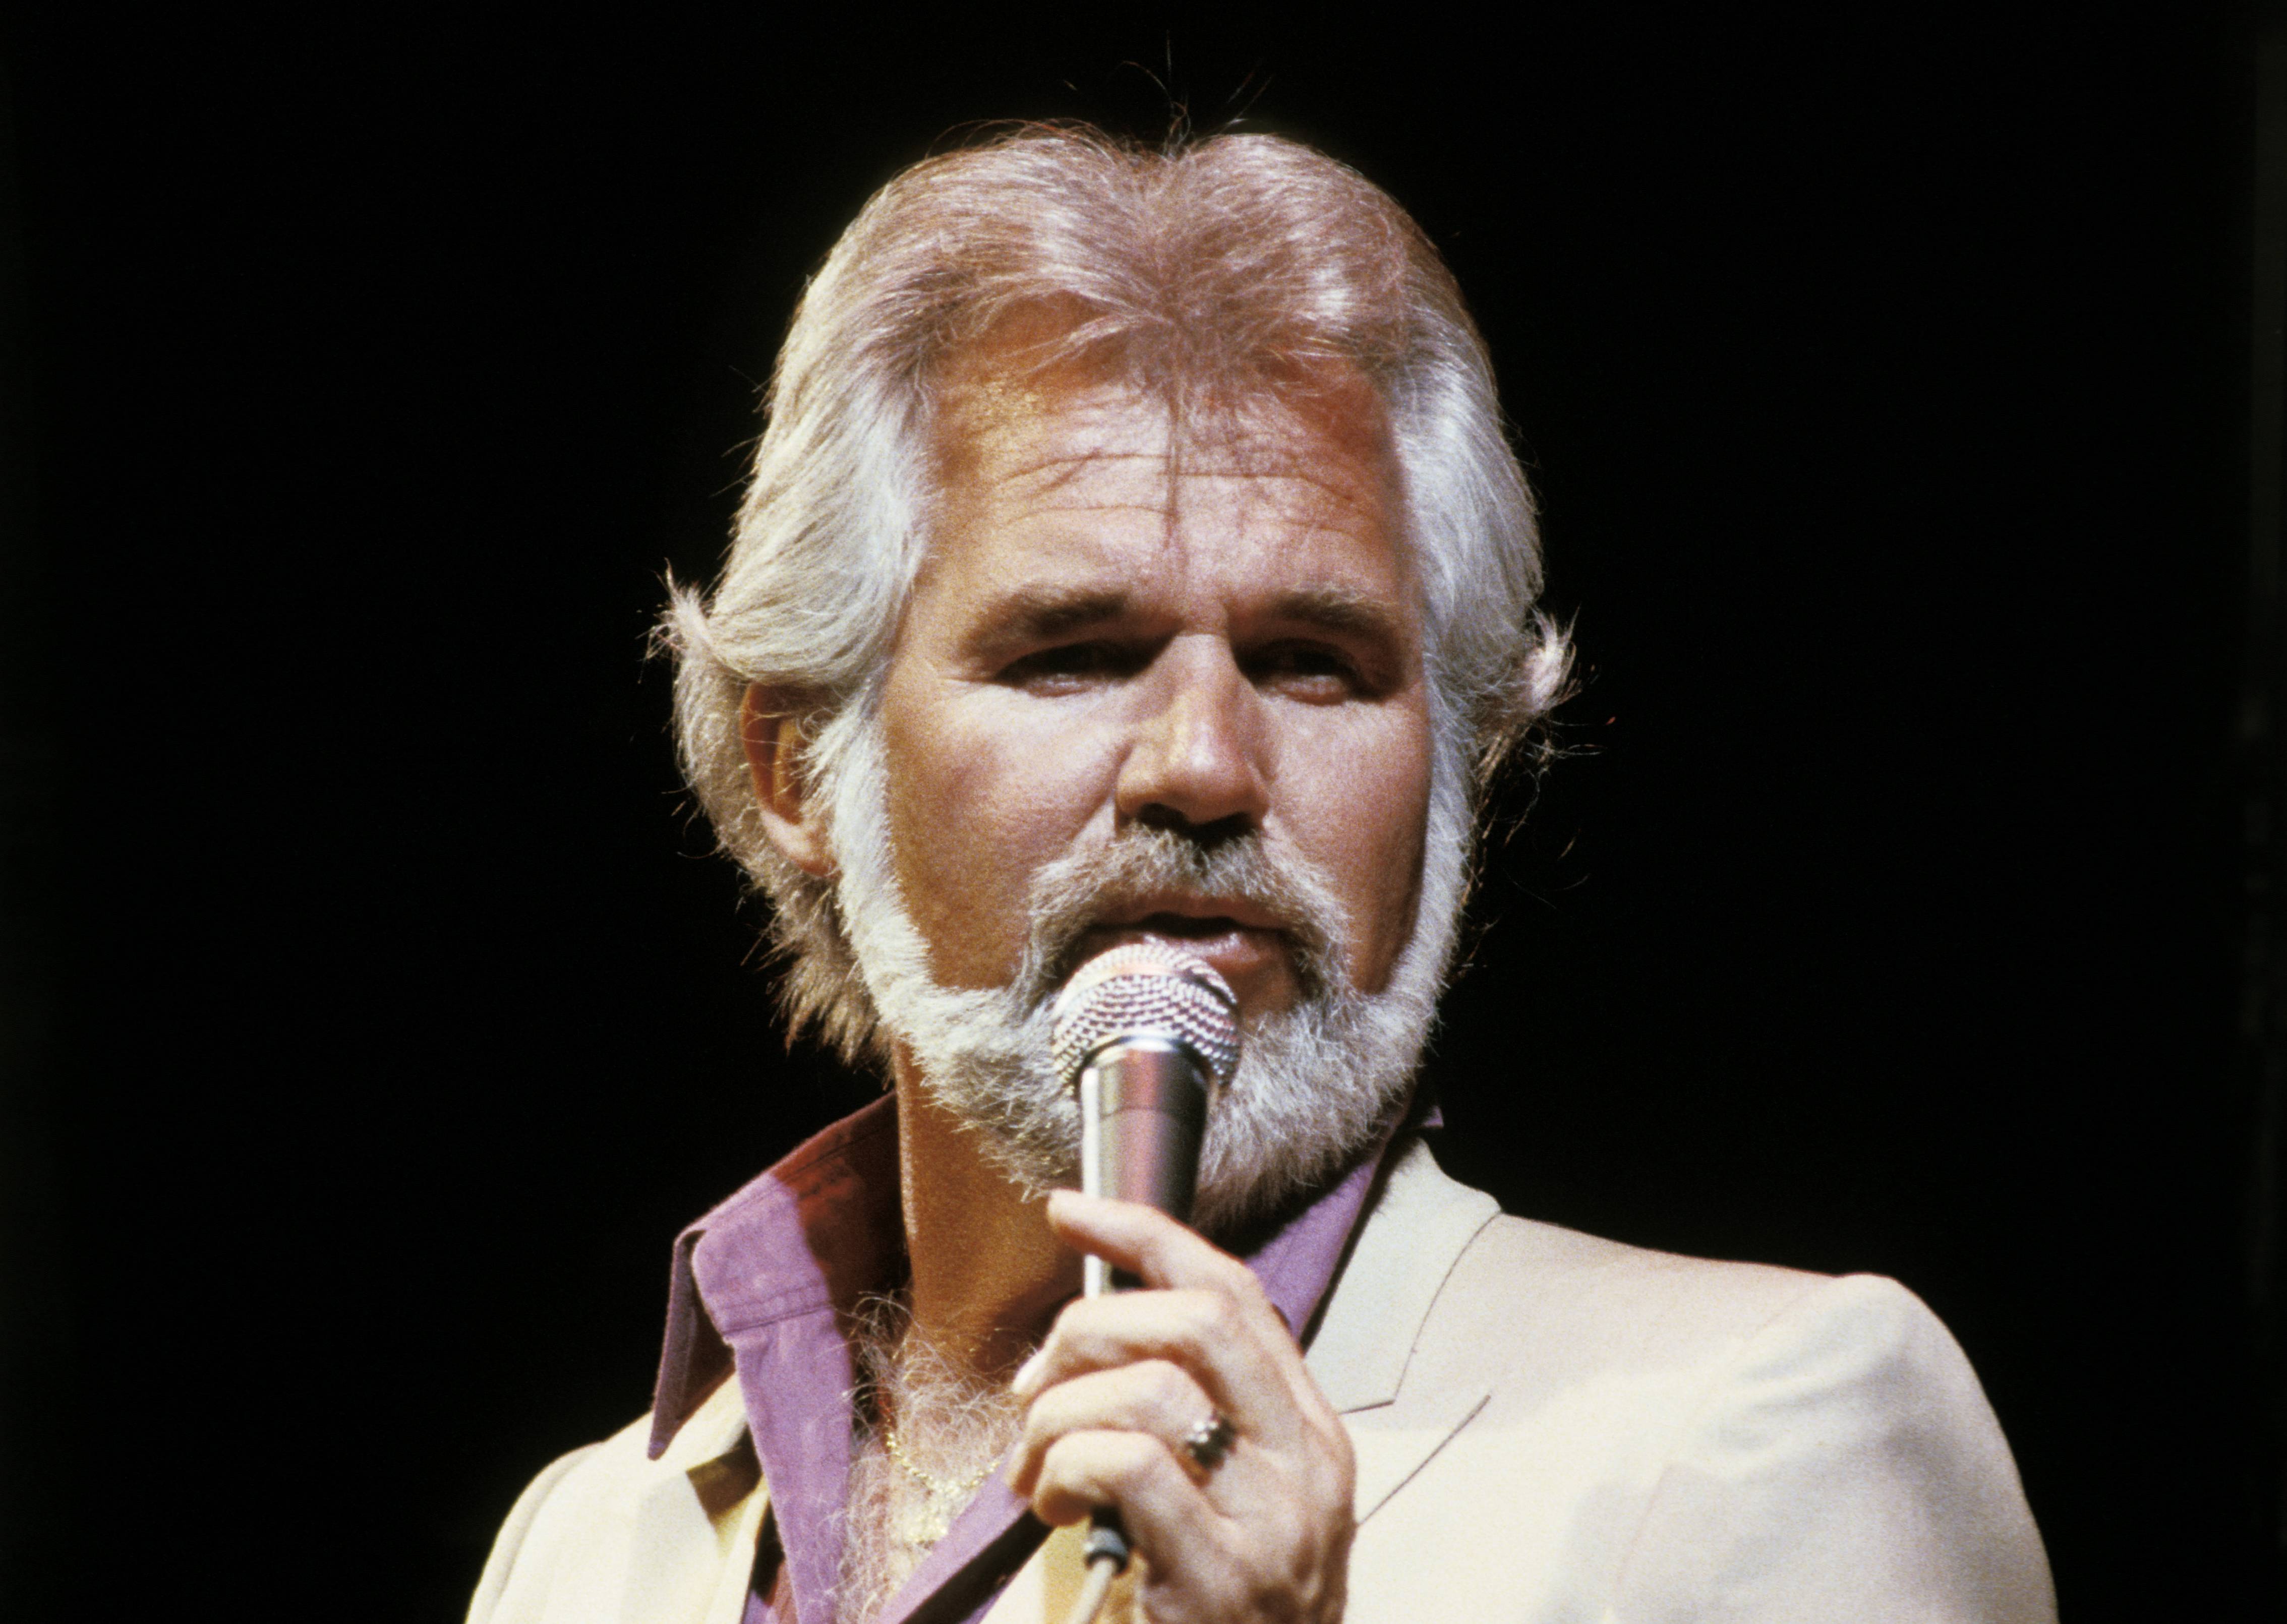 Photo of Kenny ROGERS. | Source: Getty Images